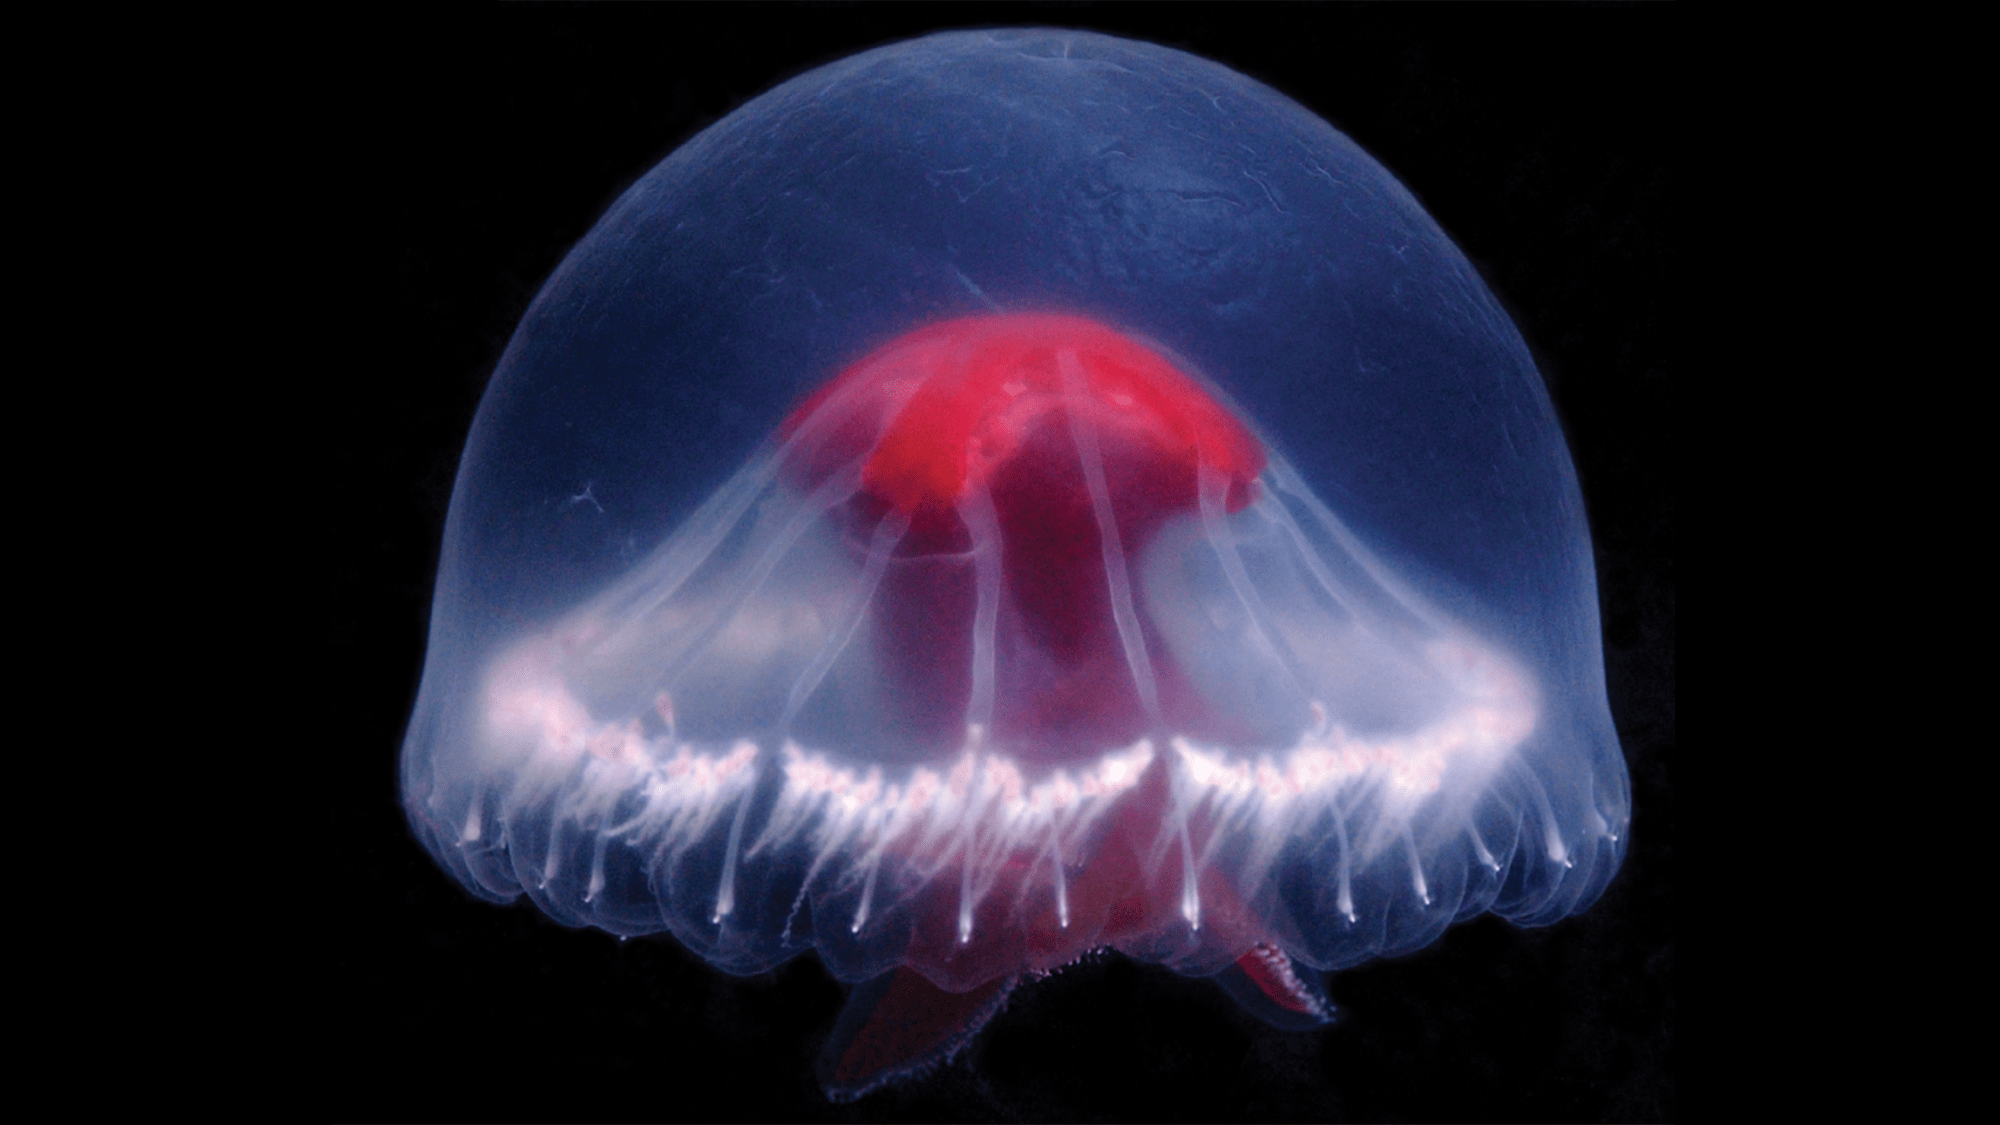 New jellyfish discovered near Japan may contain multitudes of venom